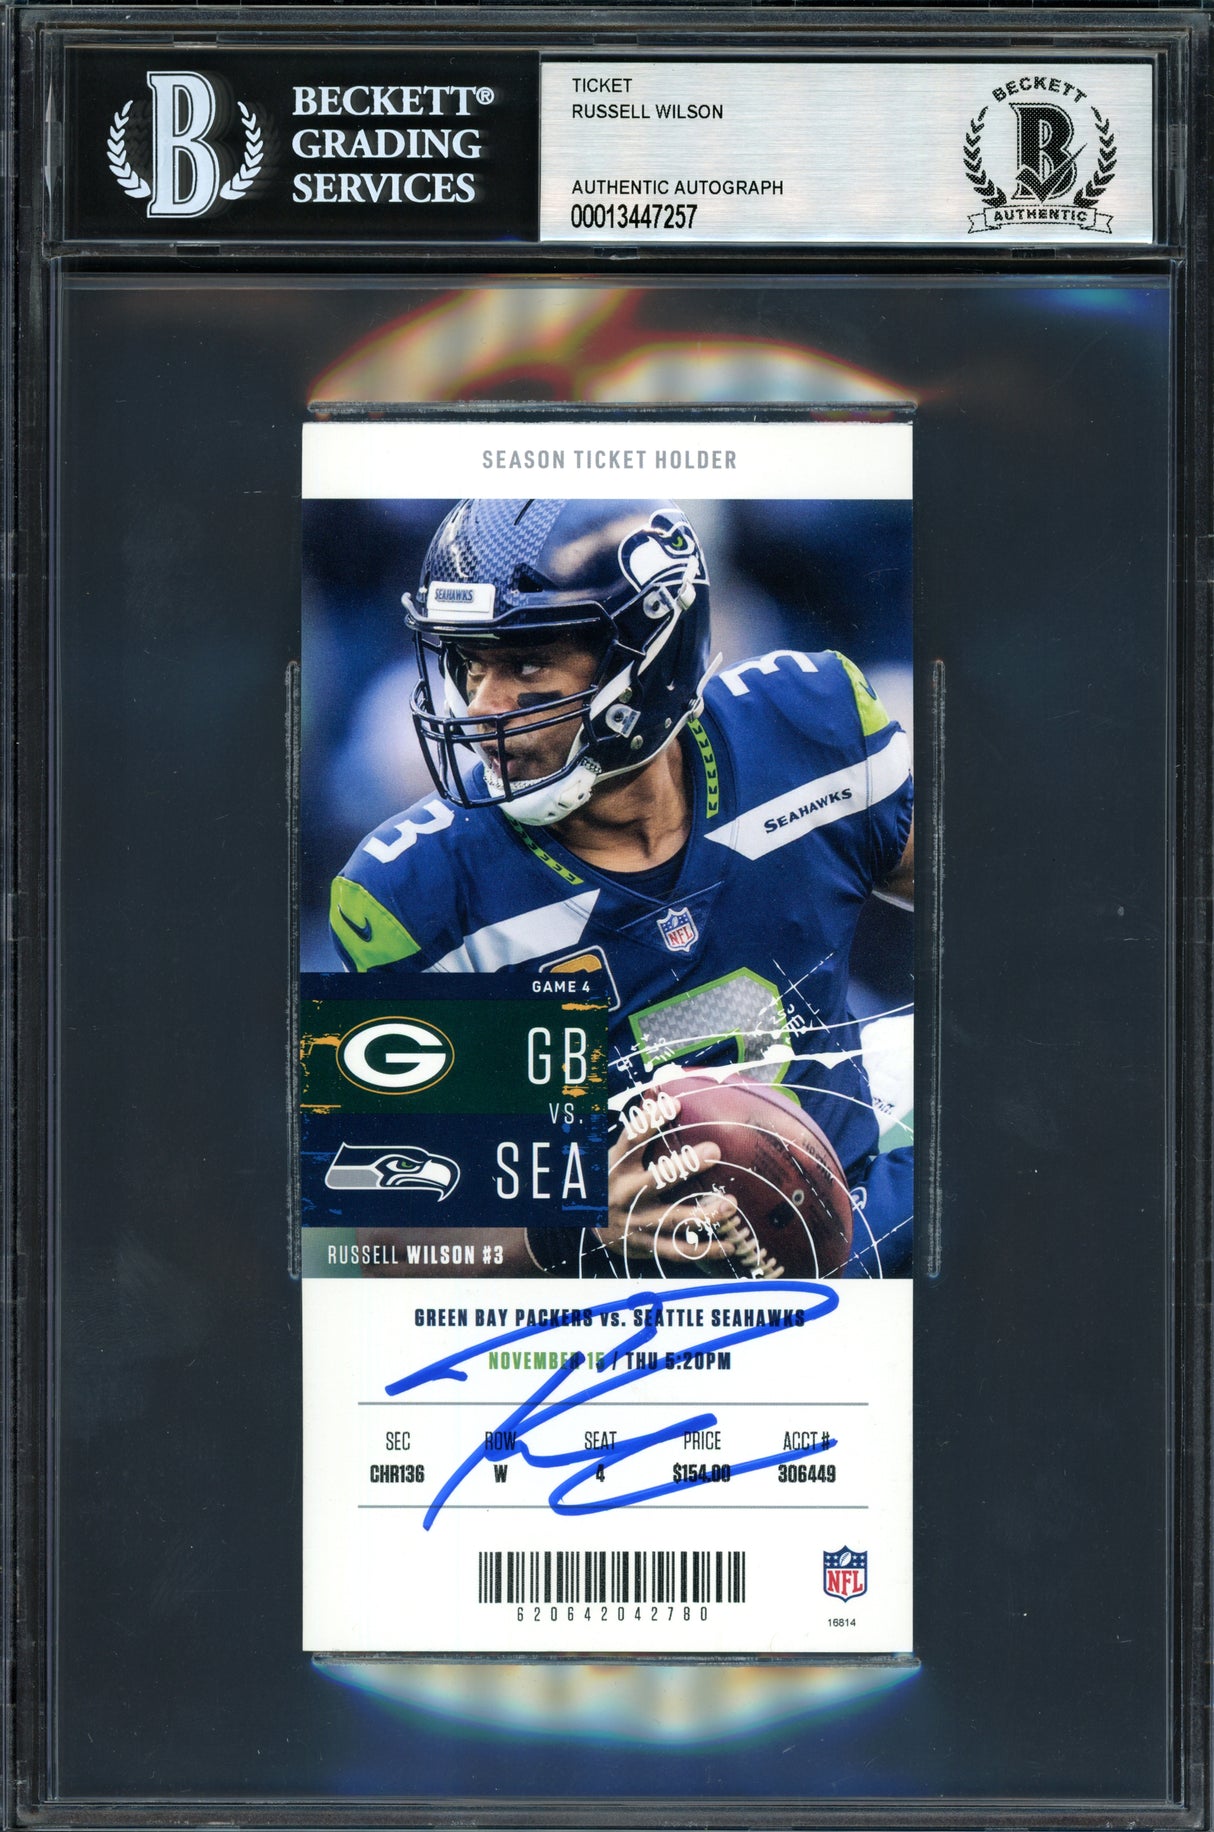 Russell Wilson Autographed 2018 3x6 Ticket Seattle Seahawks Vs. Packers 11-15-18 Beckett BAS #13447257